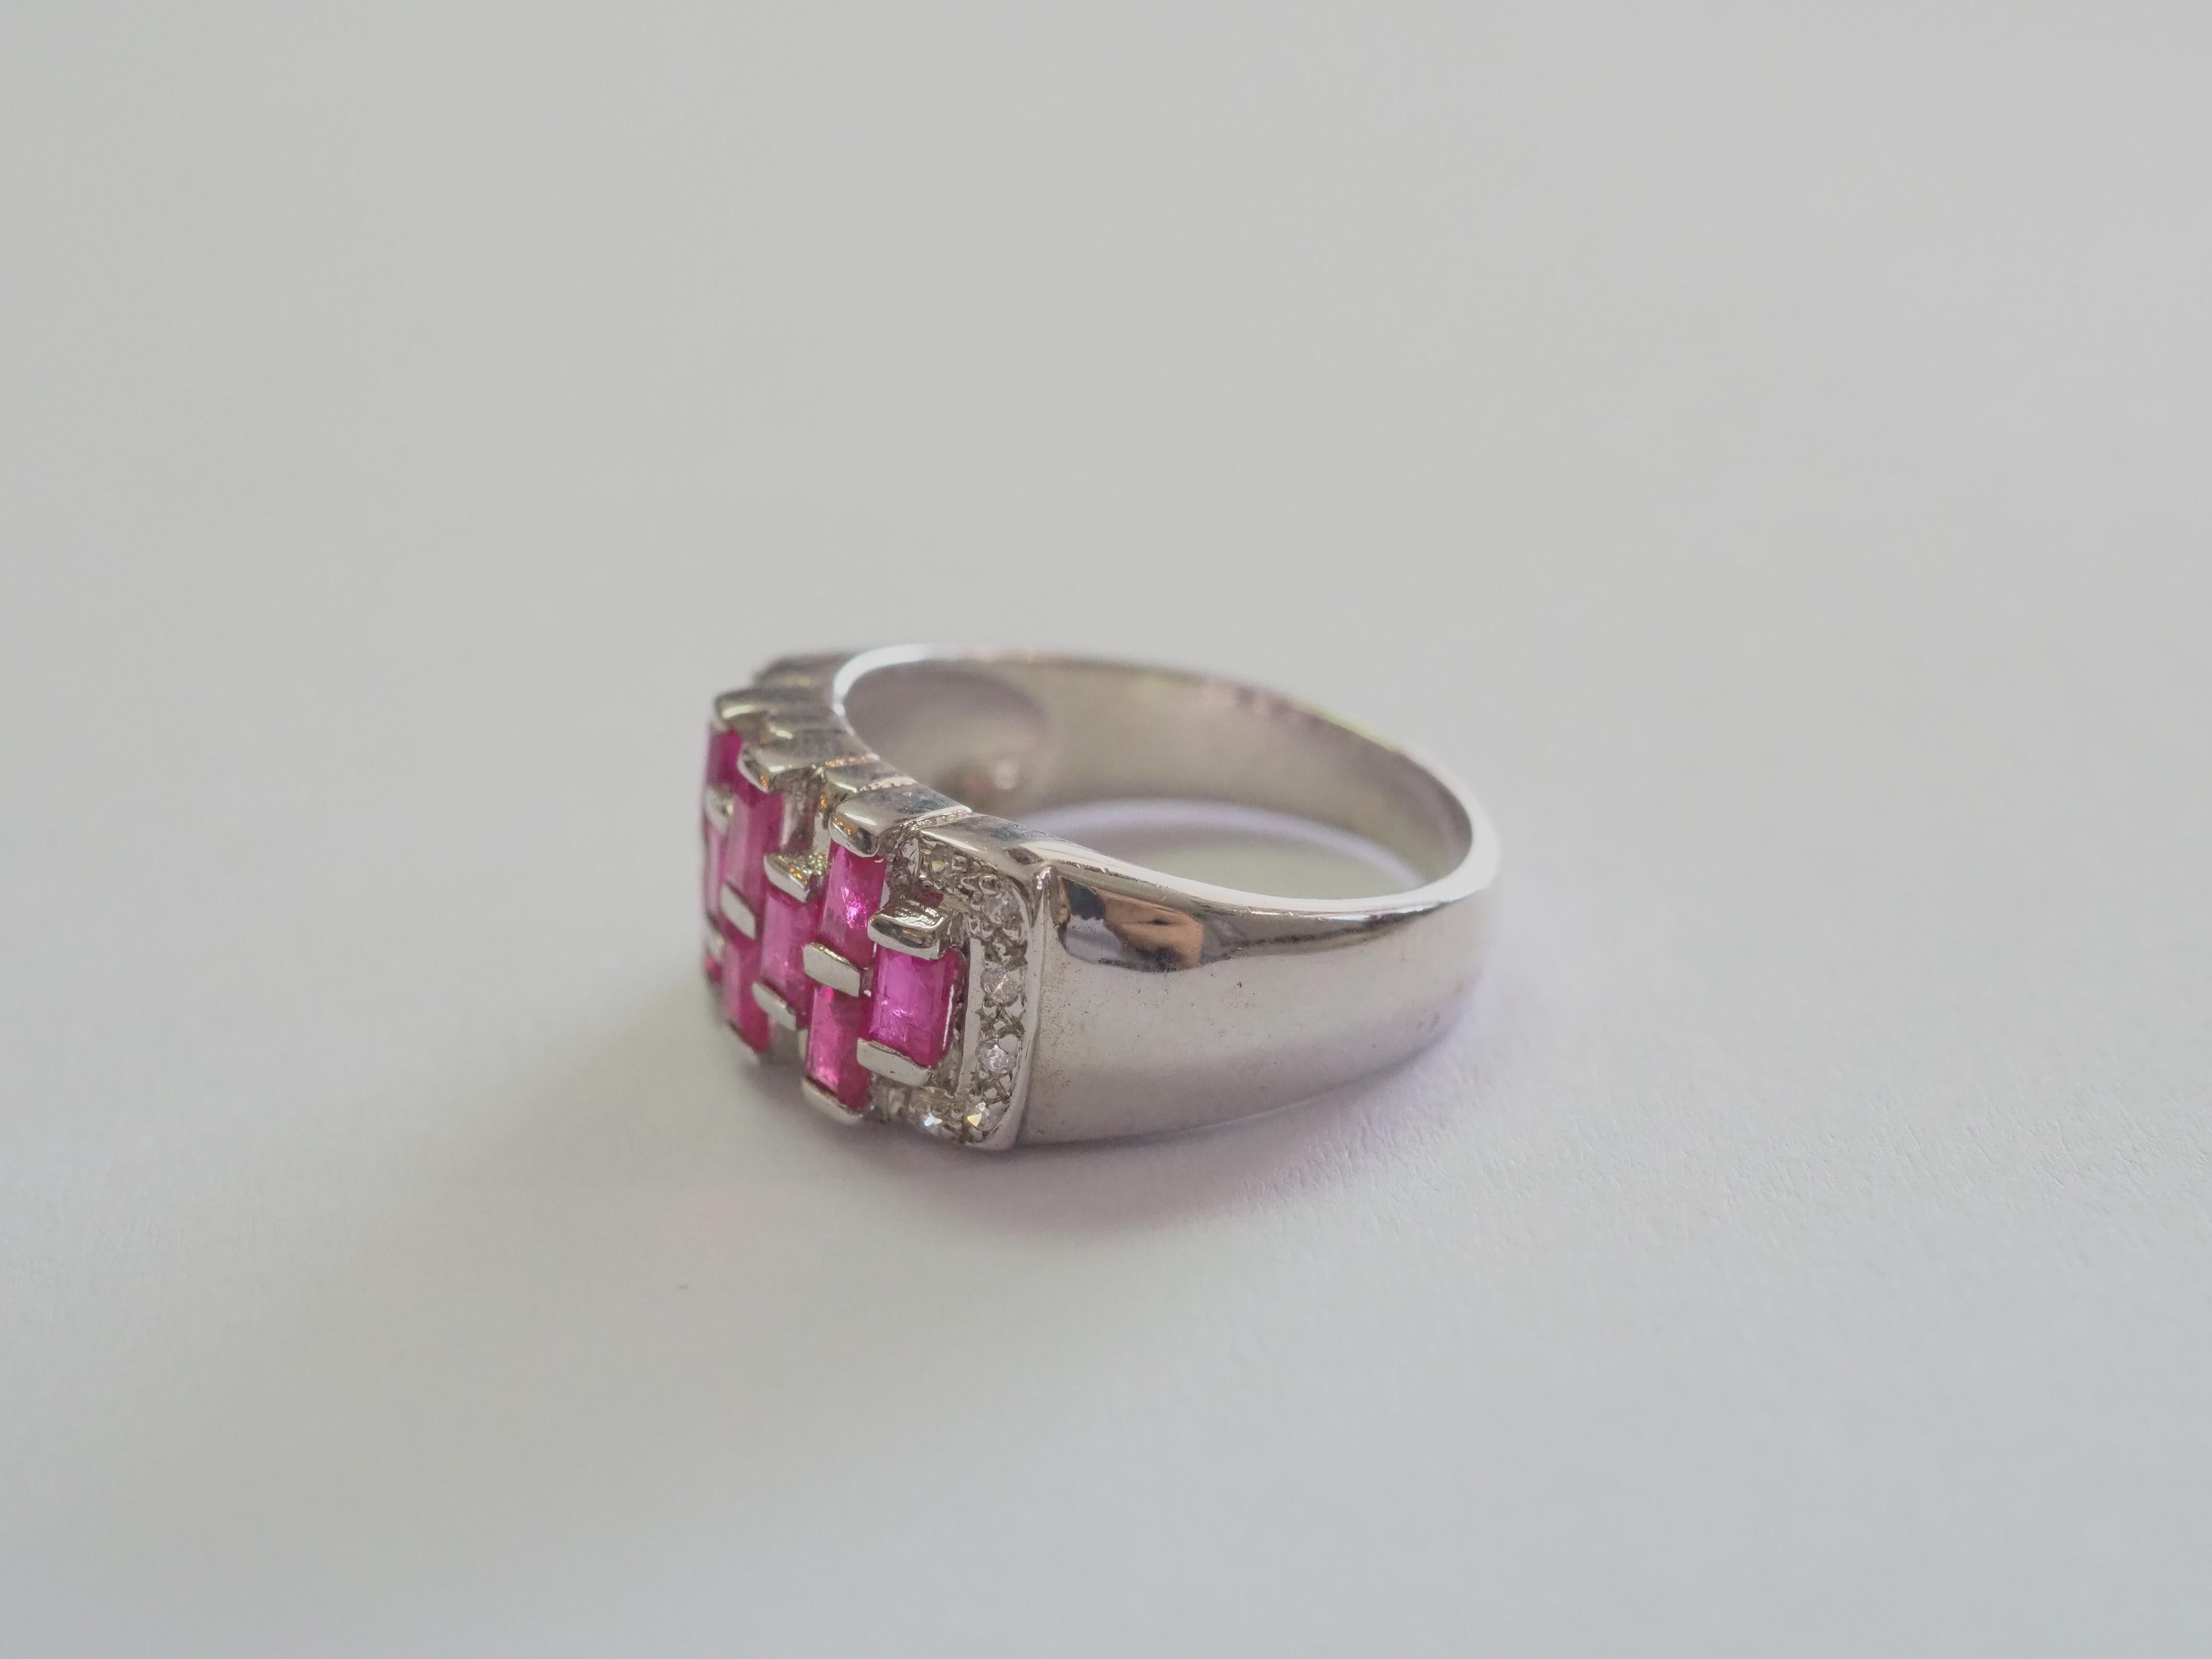 This ring is a beautiful band ring in solid sterling silver. The ring is decorated by natural baguette pinkish red ruby set beautifully on the face of the ring. The white stone are Cubic Zirconia. The ruby gemstone is one of the most popular in the